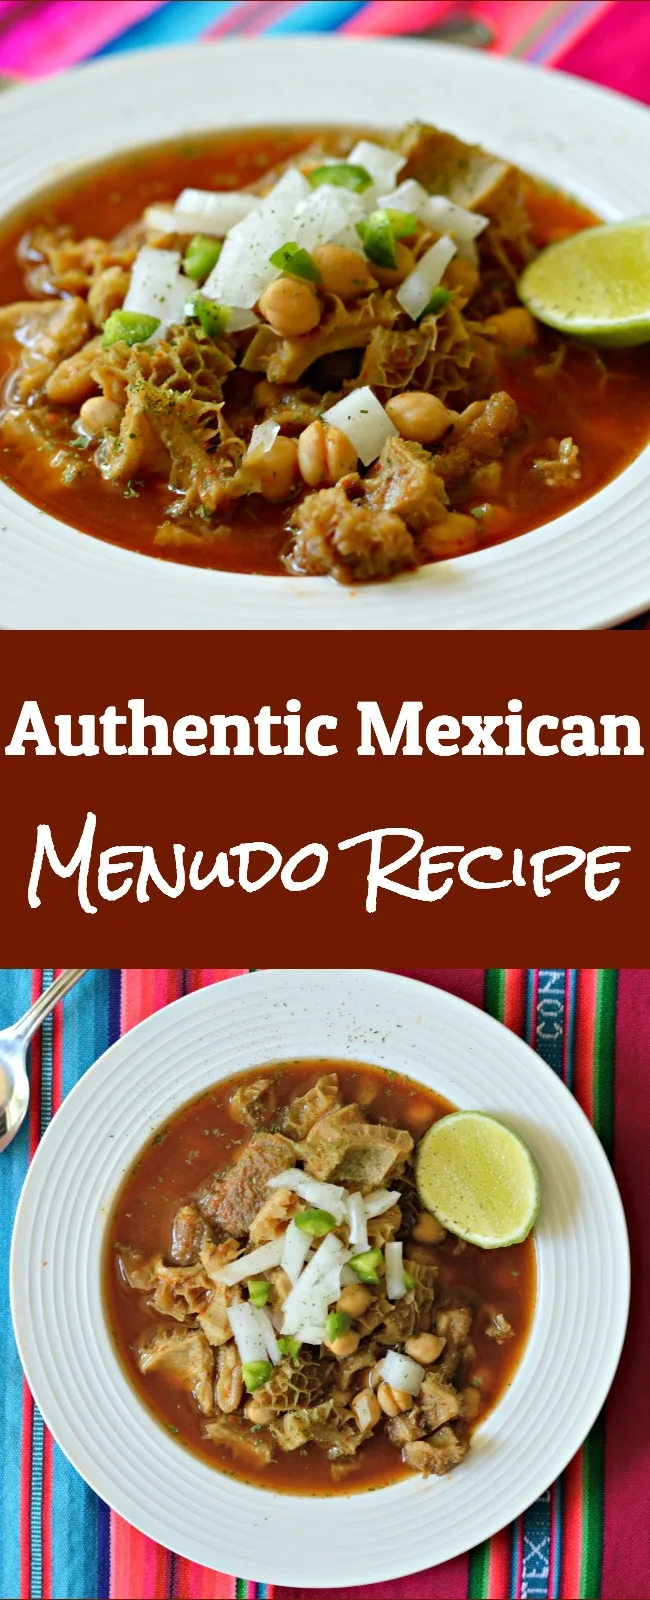 This Authentic Mexican Menudo Recipe is as Mexican as it gets and you will be surprised how good it is!